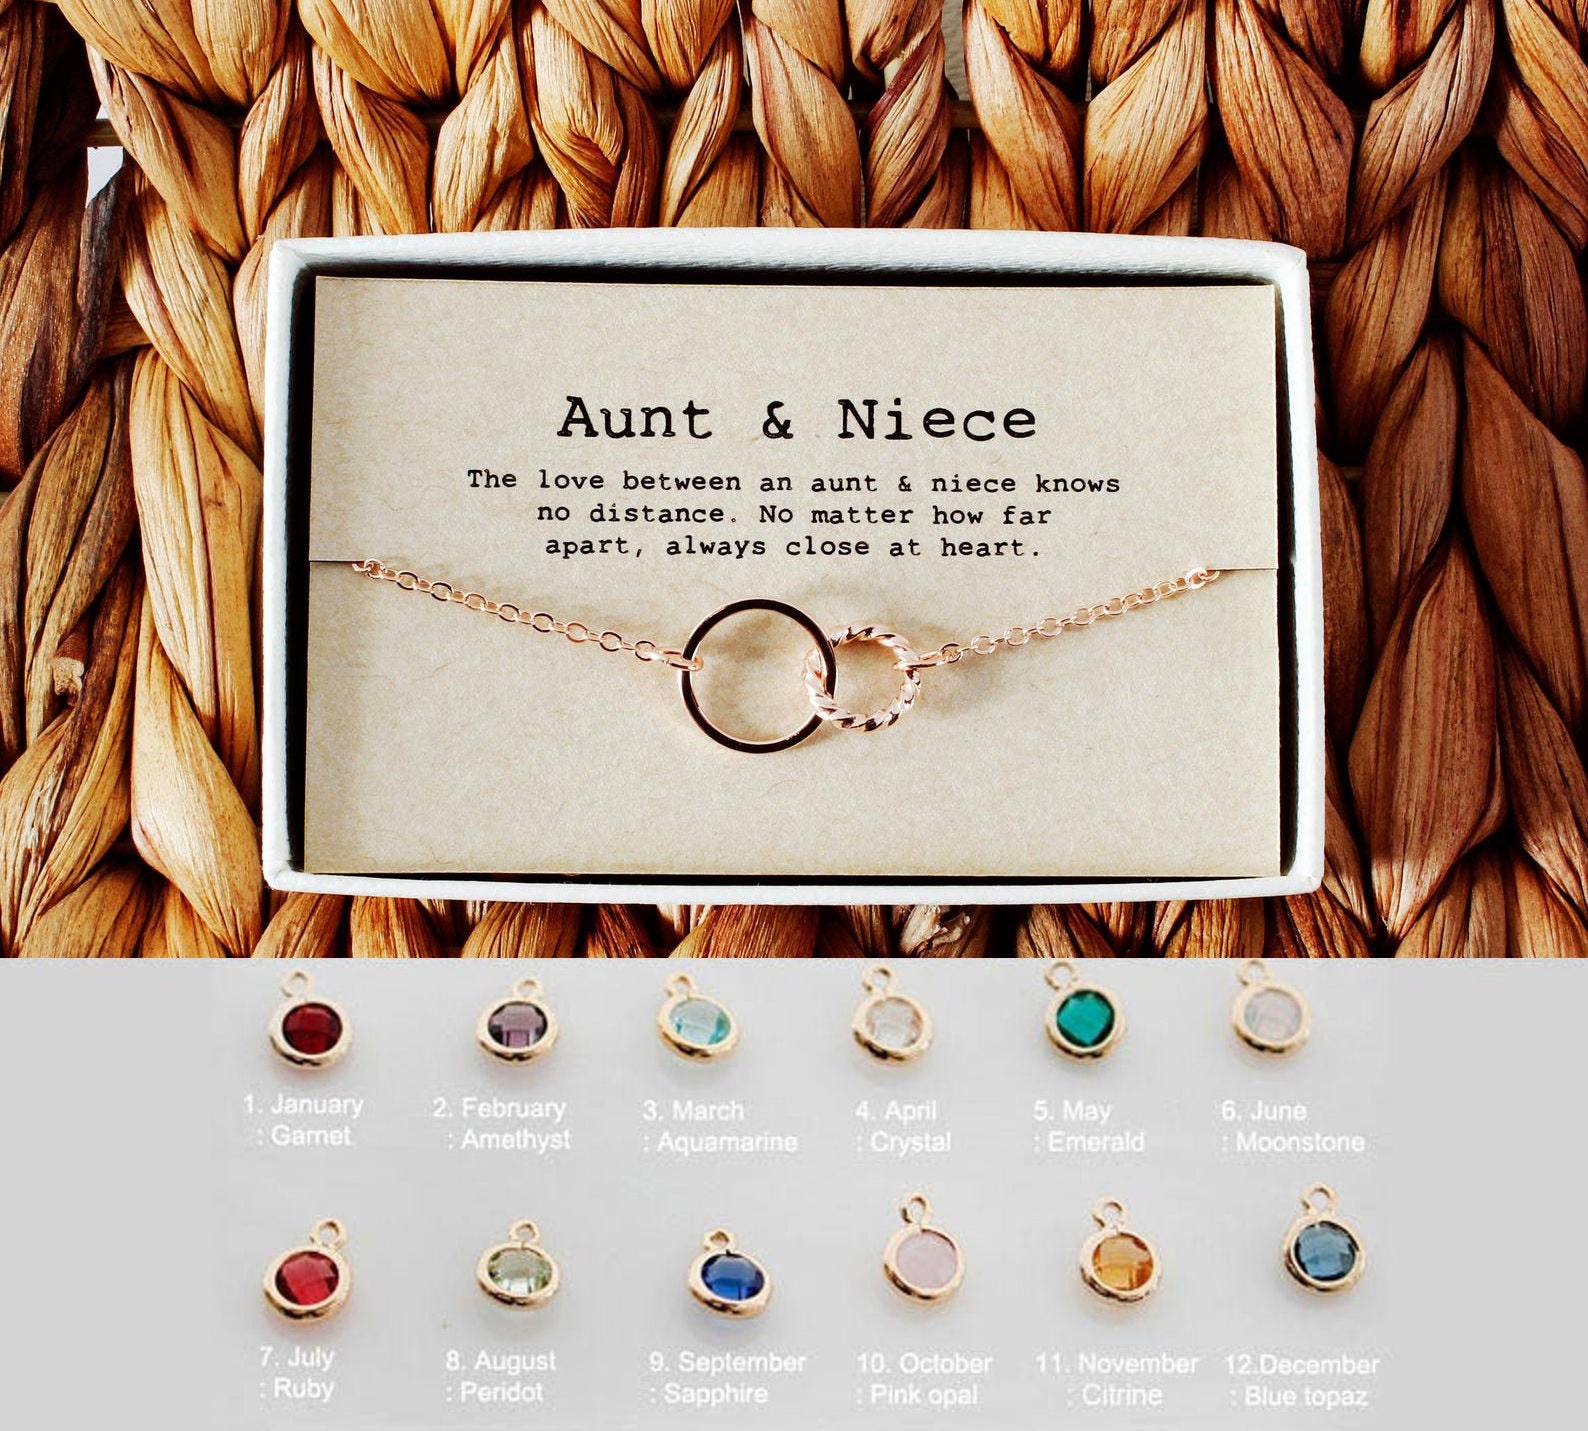 Aunt and Niece Gift The Love Between Aunt & Niece is Forever Bracelet  Expandable Charm Bracelet Aunt Niece Jewelry - Walmart.com